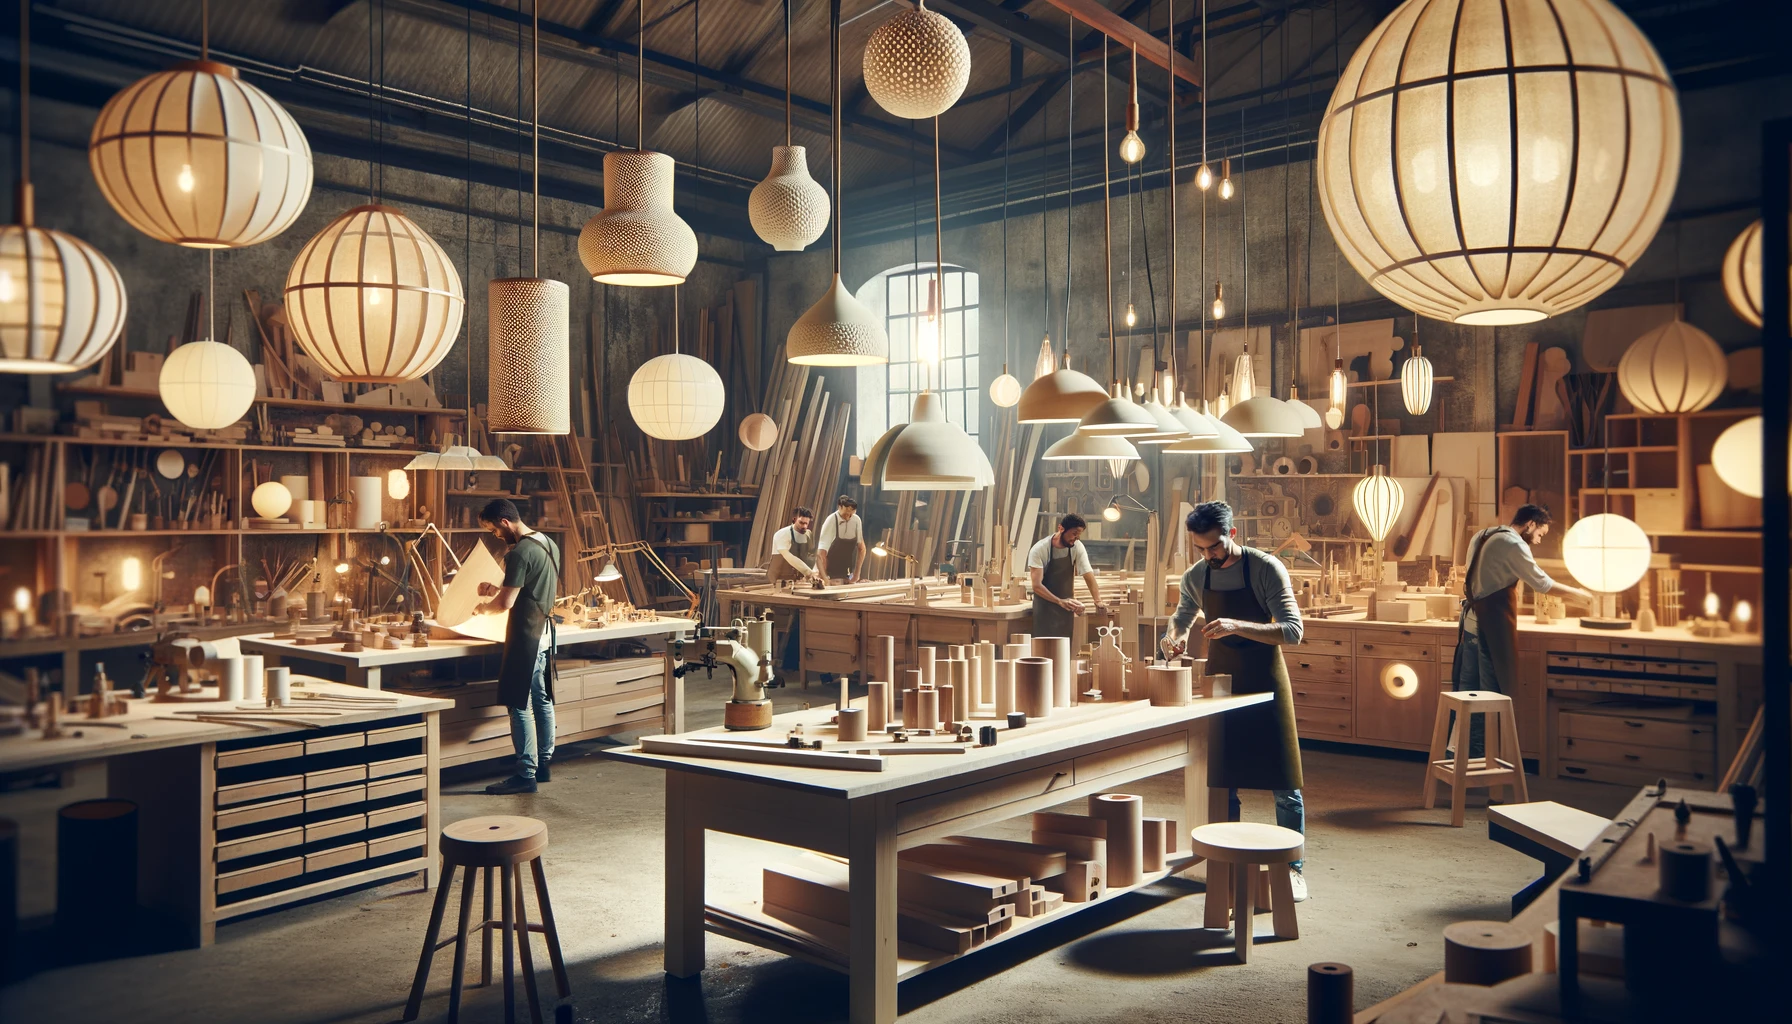 The Light of Creativity: Designer Lighting Fixtures from Your Trusted Furniture Company